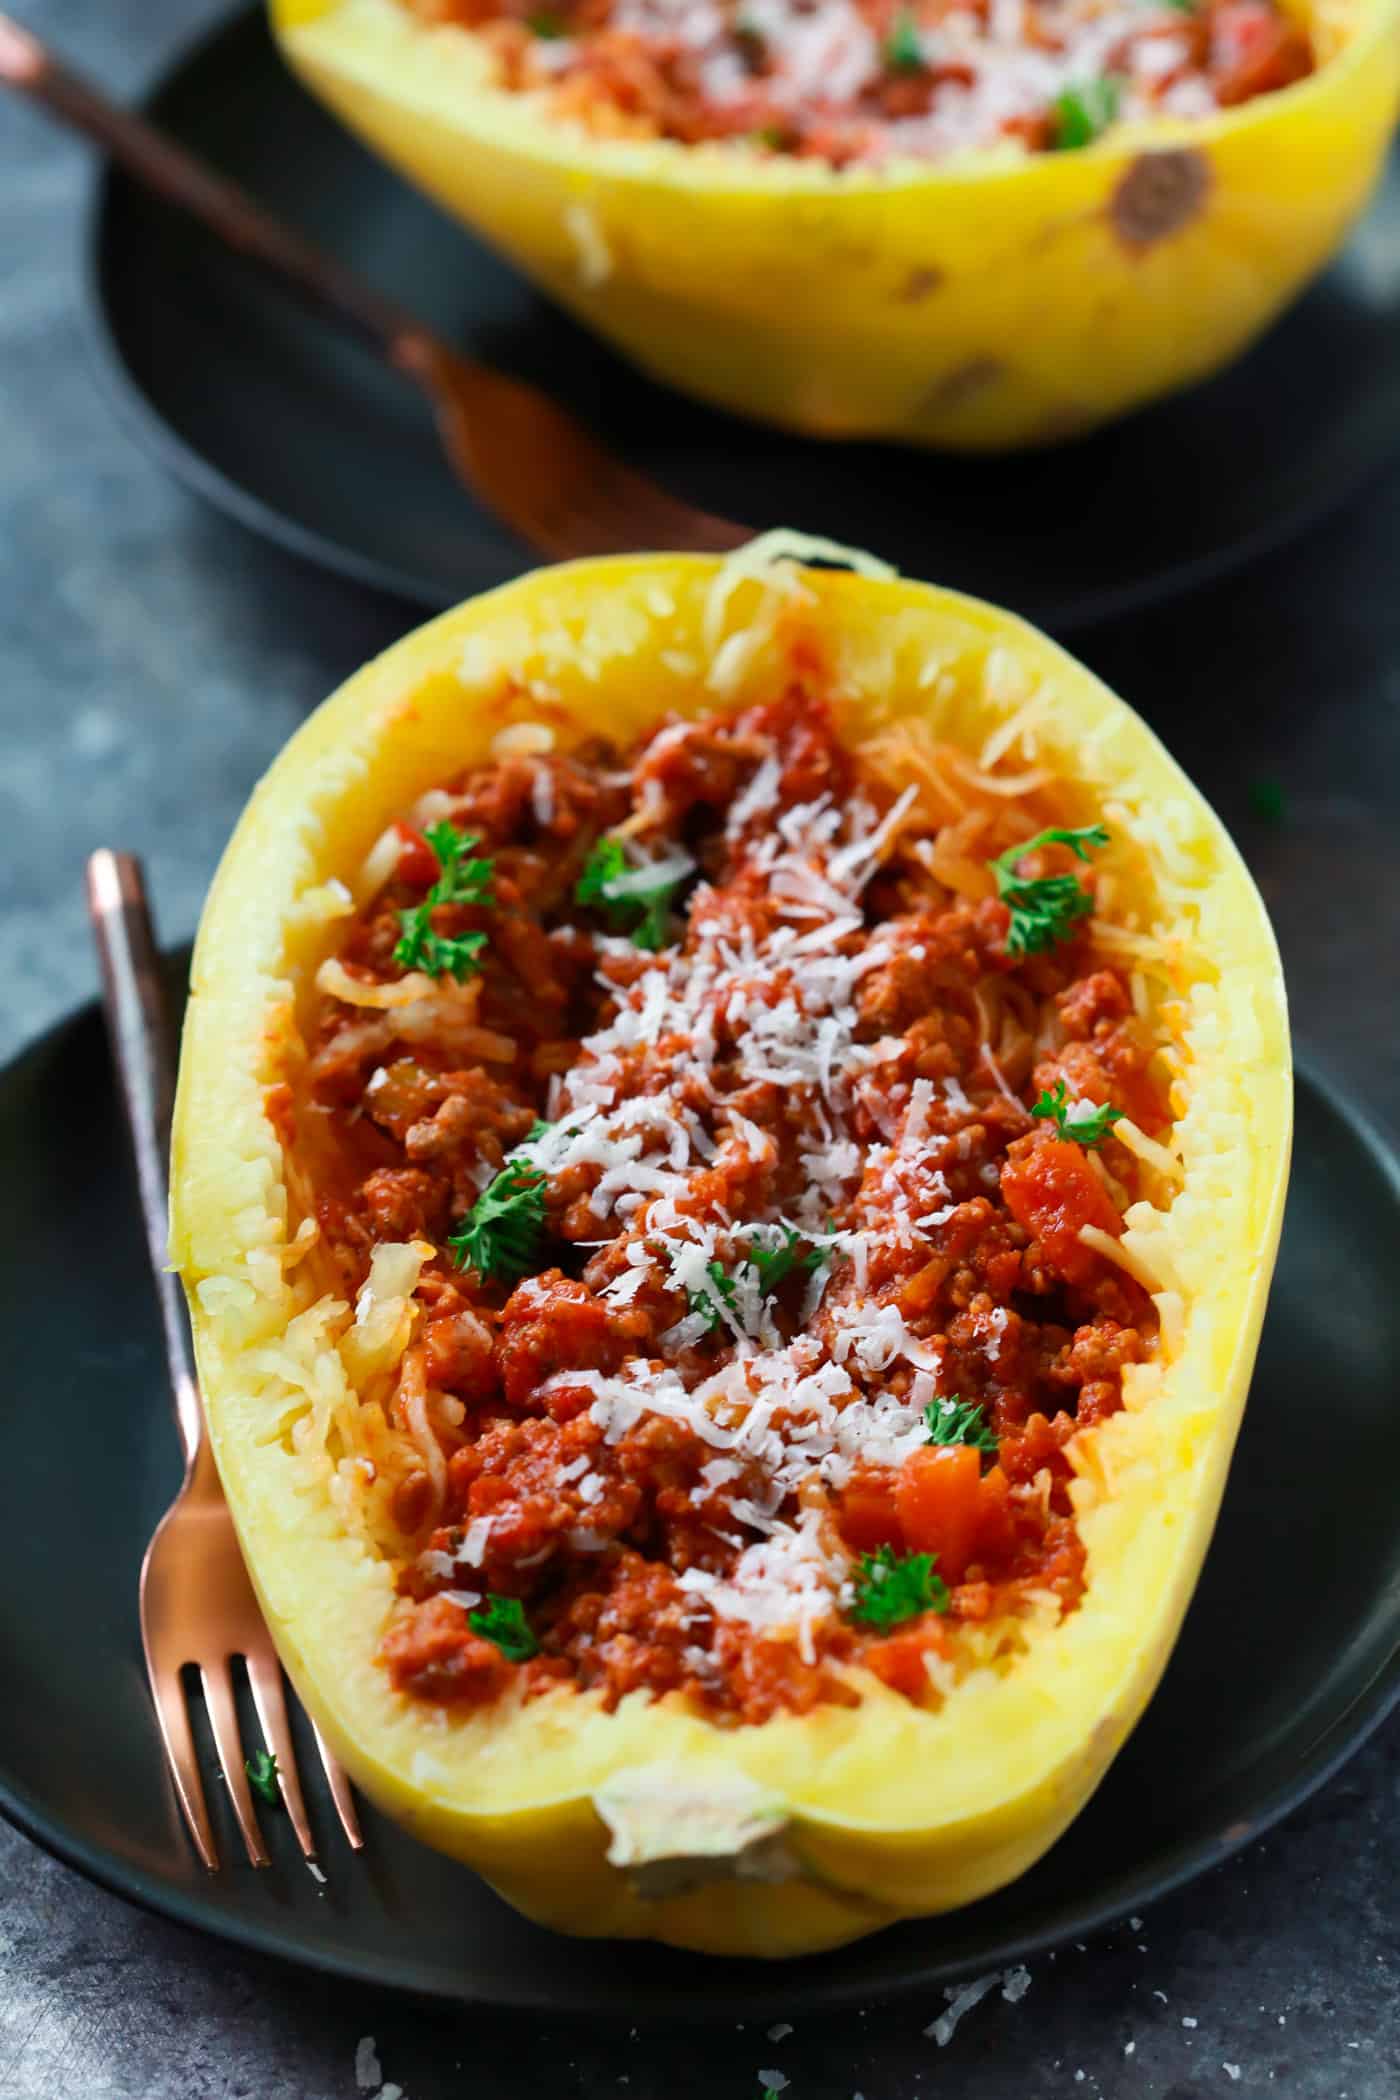 Comforting Food doesn’t need to be full of carbs, right? I can prove what I’m saying with this super delicious Easy Bolognese Stuffed Spaghetti Squash recipe. It’s also gluten-free and paleo friendly. Enjoy!